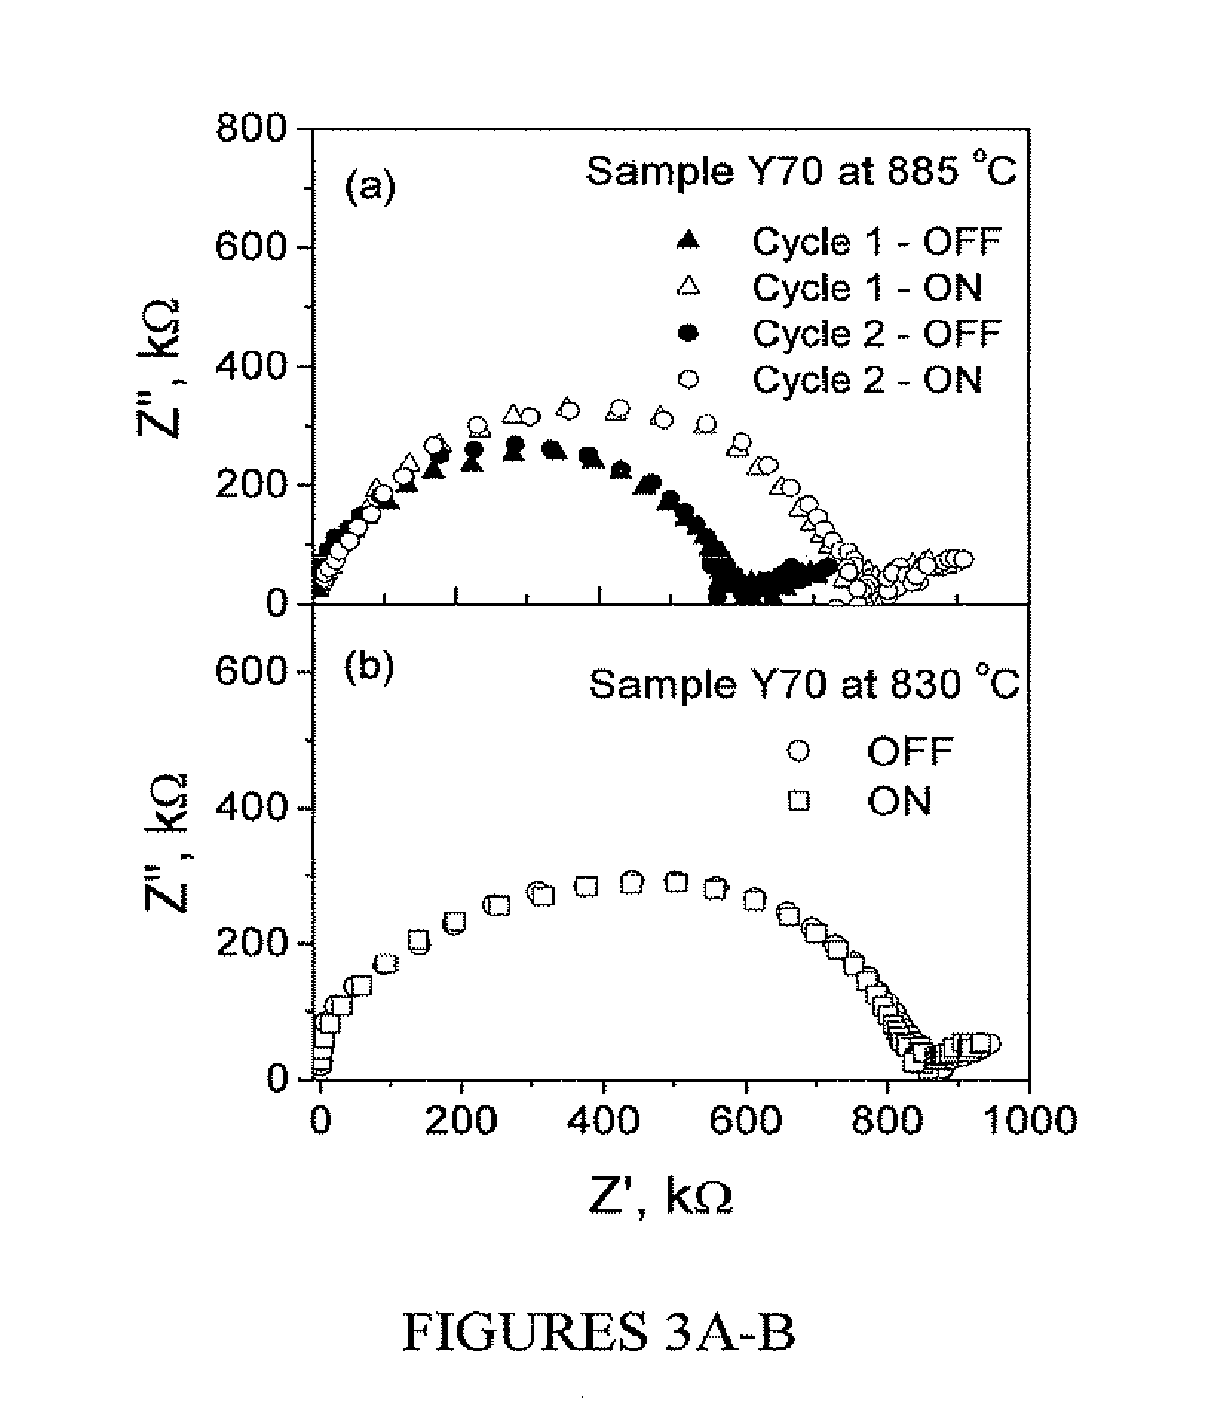 Photo-activation of solid oxide fuel cells and gas separation devices